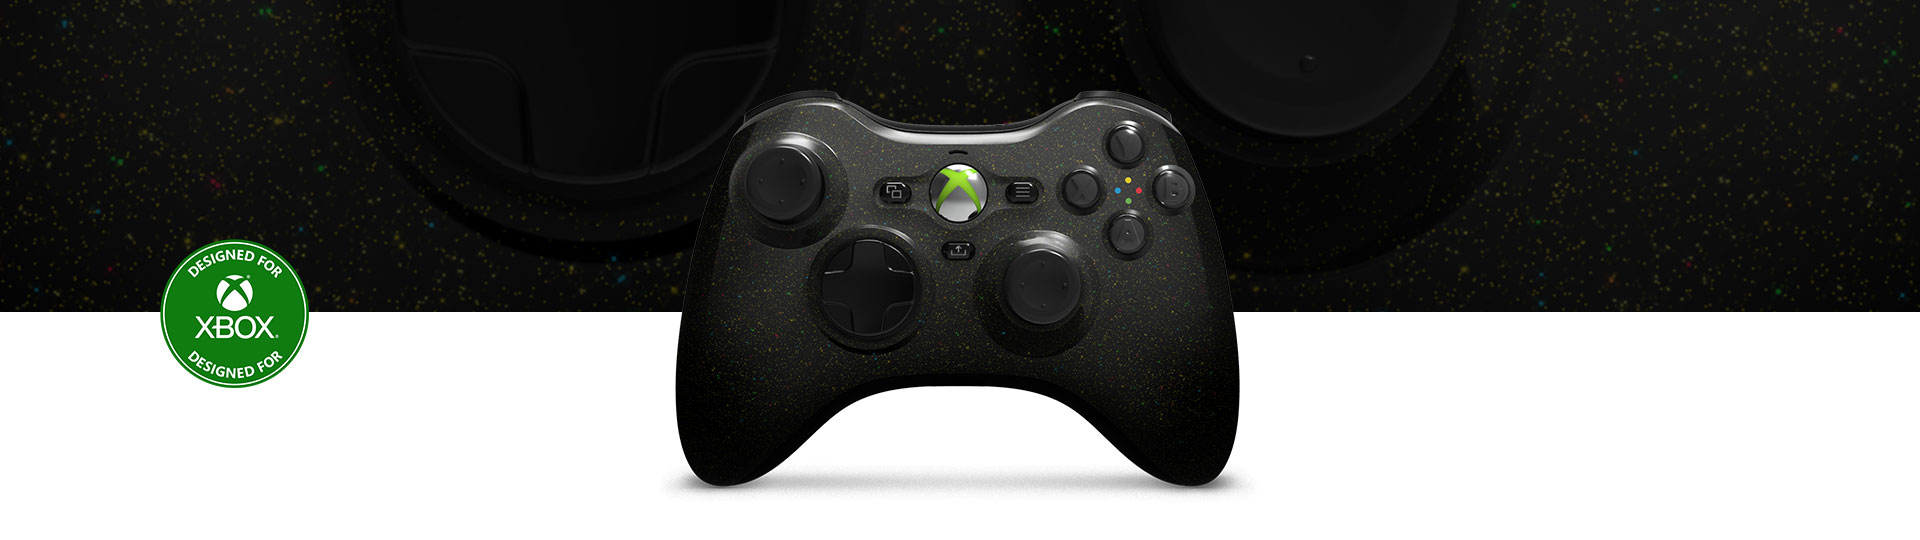 Designed for Xbox seal, Front view of the Hyperkin Xenon Wired Controller for Xbox - Cosmic Night with close-up view in the background.